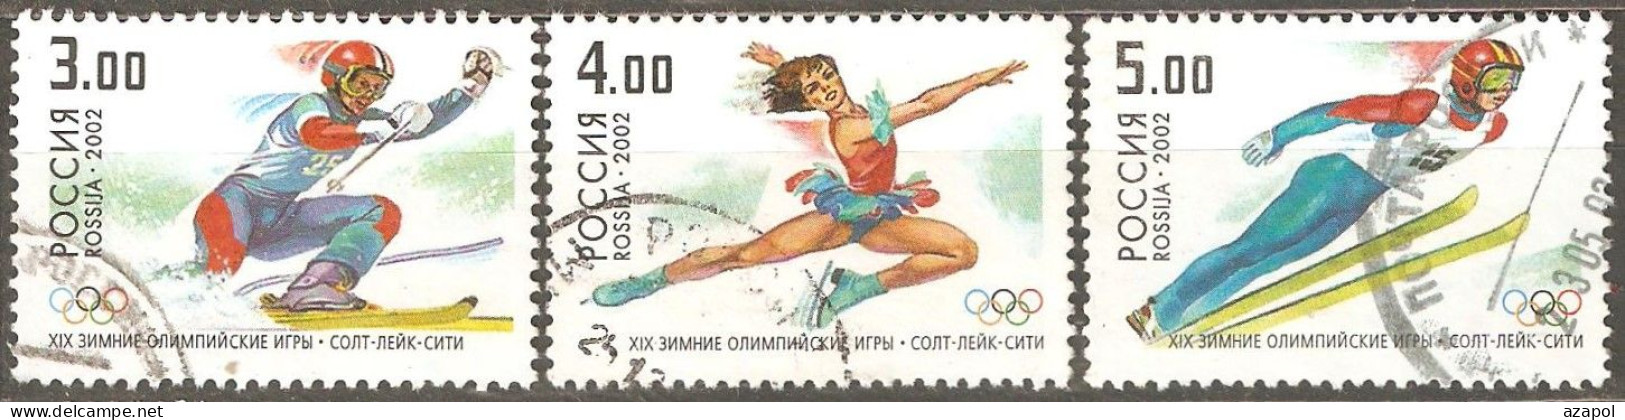 Russia: Full Set Of 3 Used Stamps, Winter Olympic Games - Salt Lake City, USA, 2002, Mi#956-8 - Used Stamps